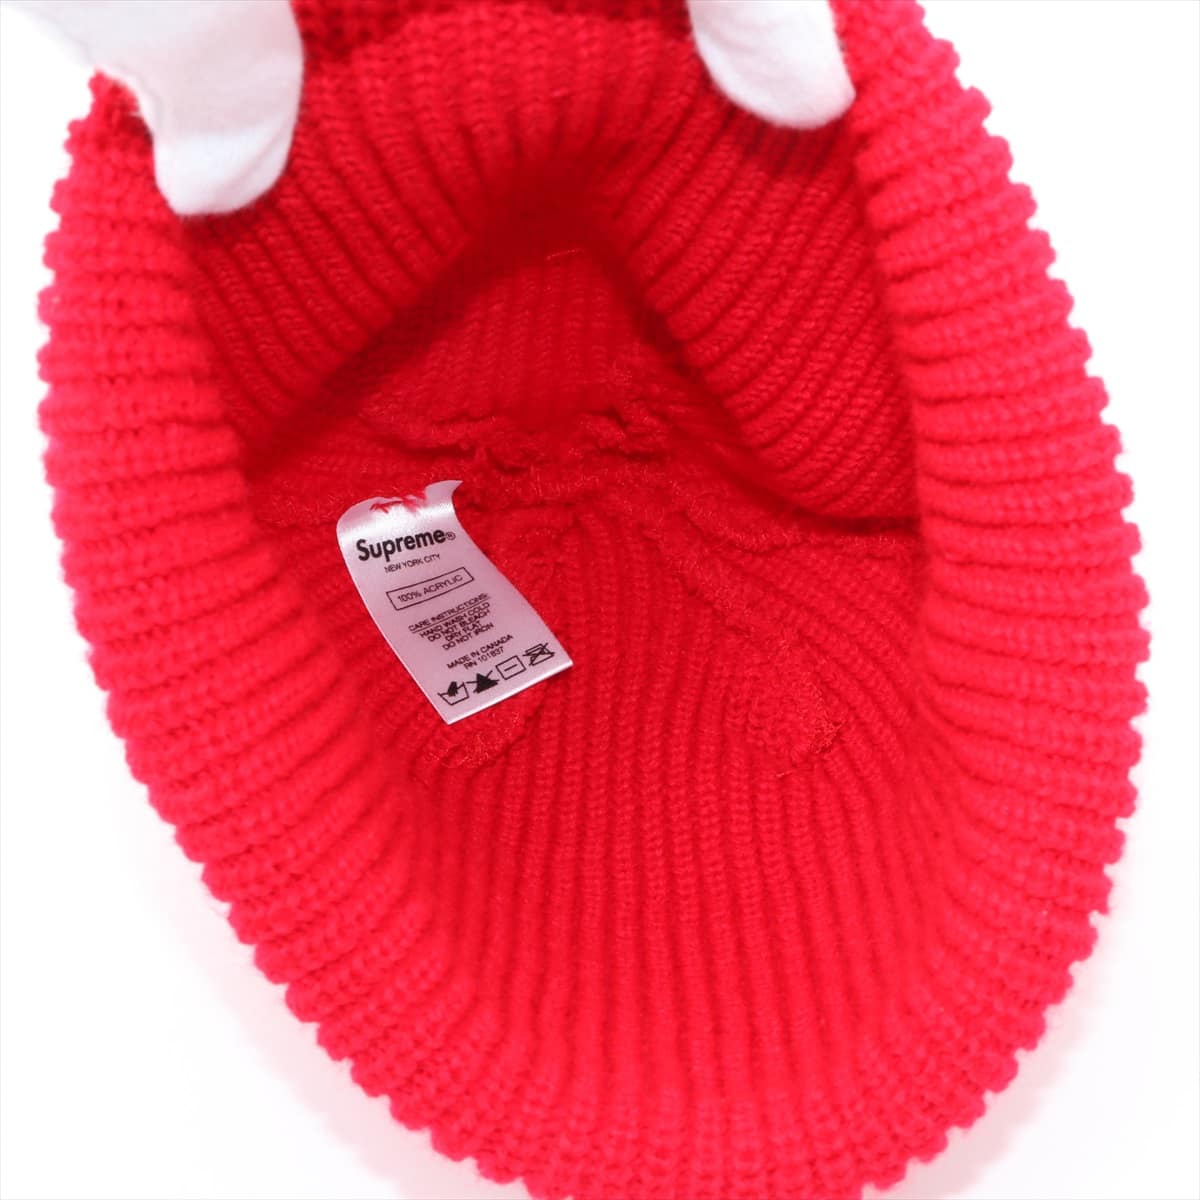 Supreme Knit cap Acrylic Red